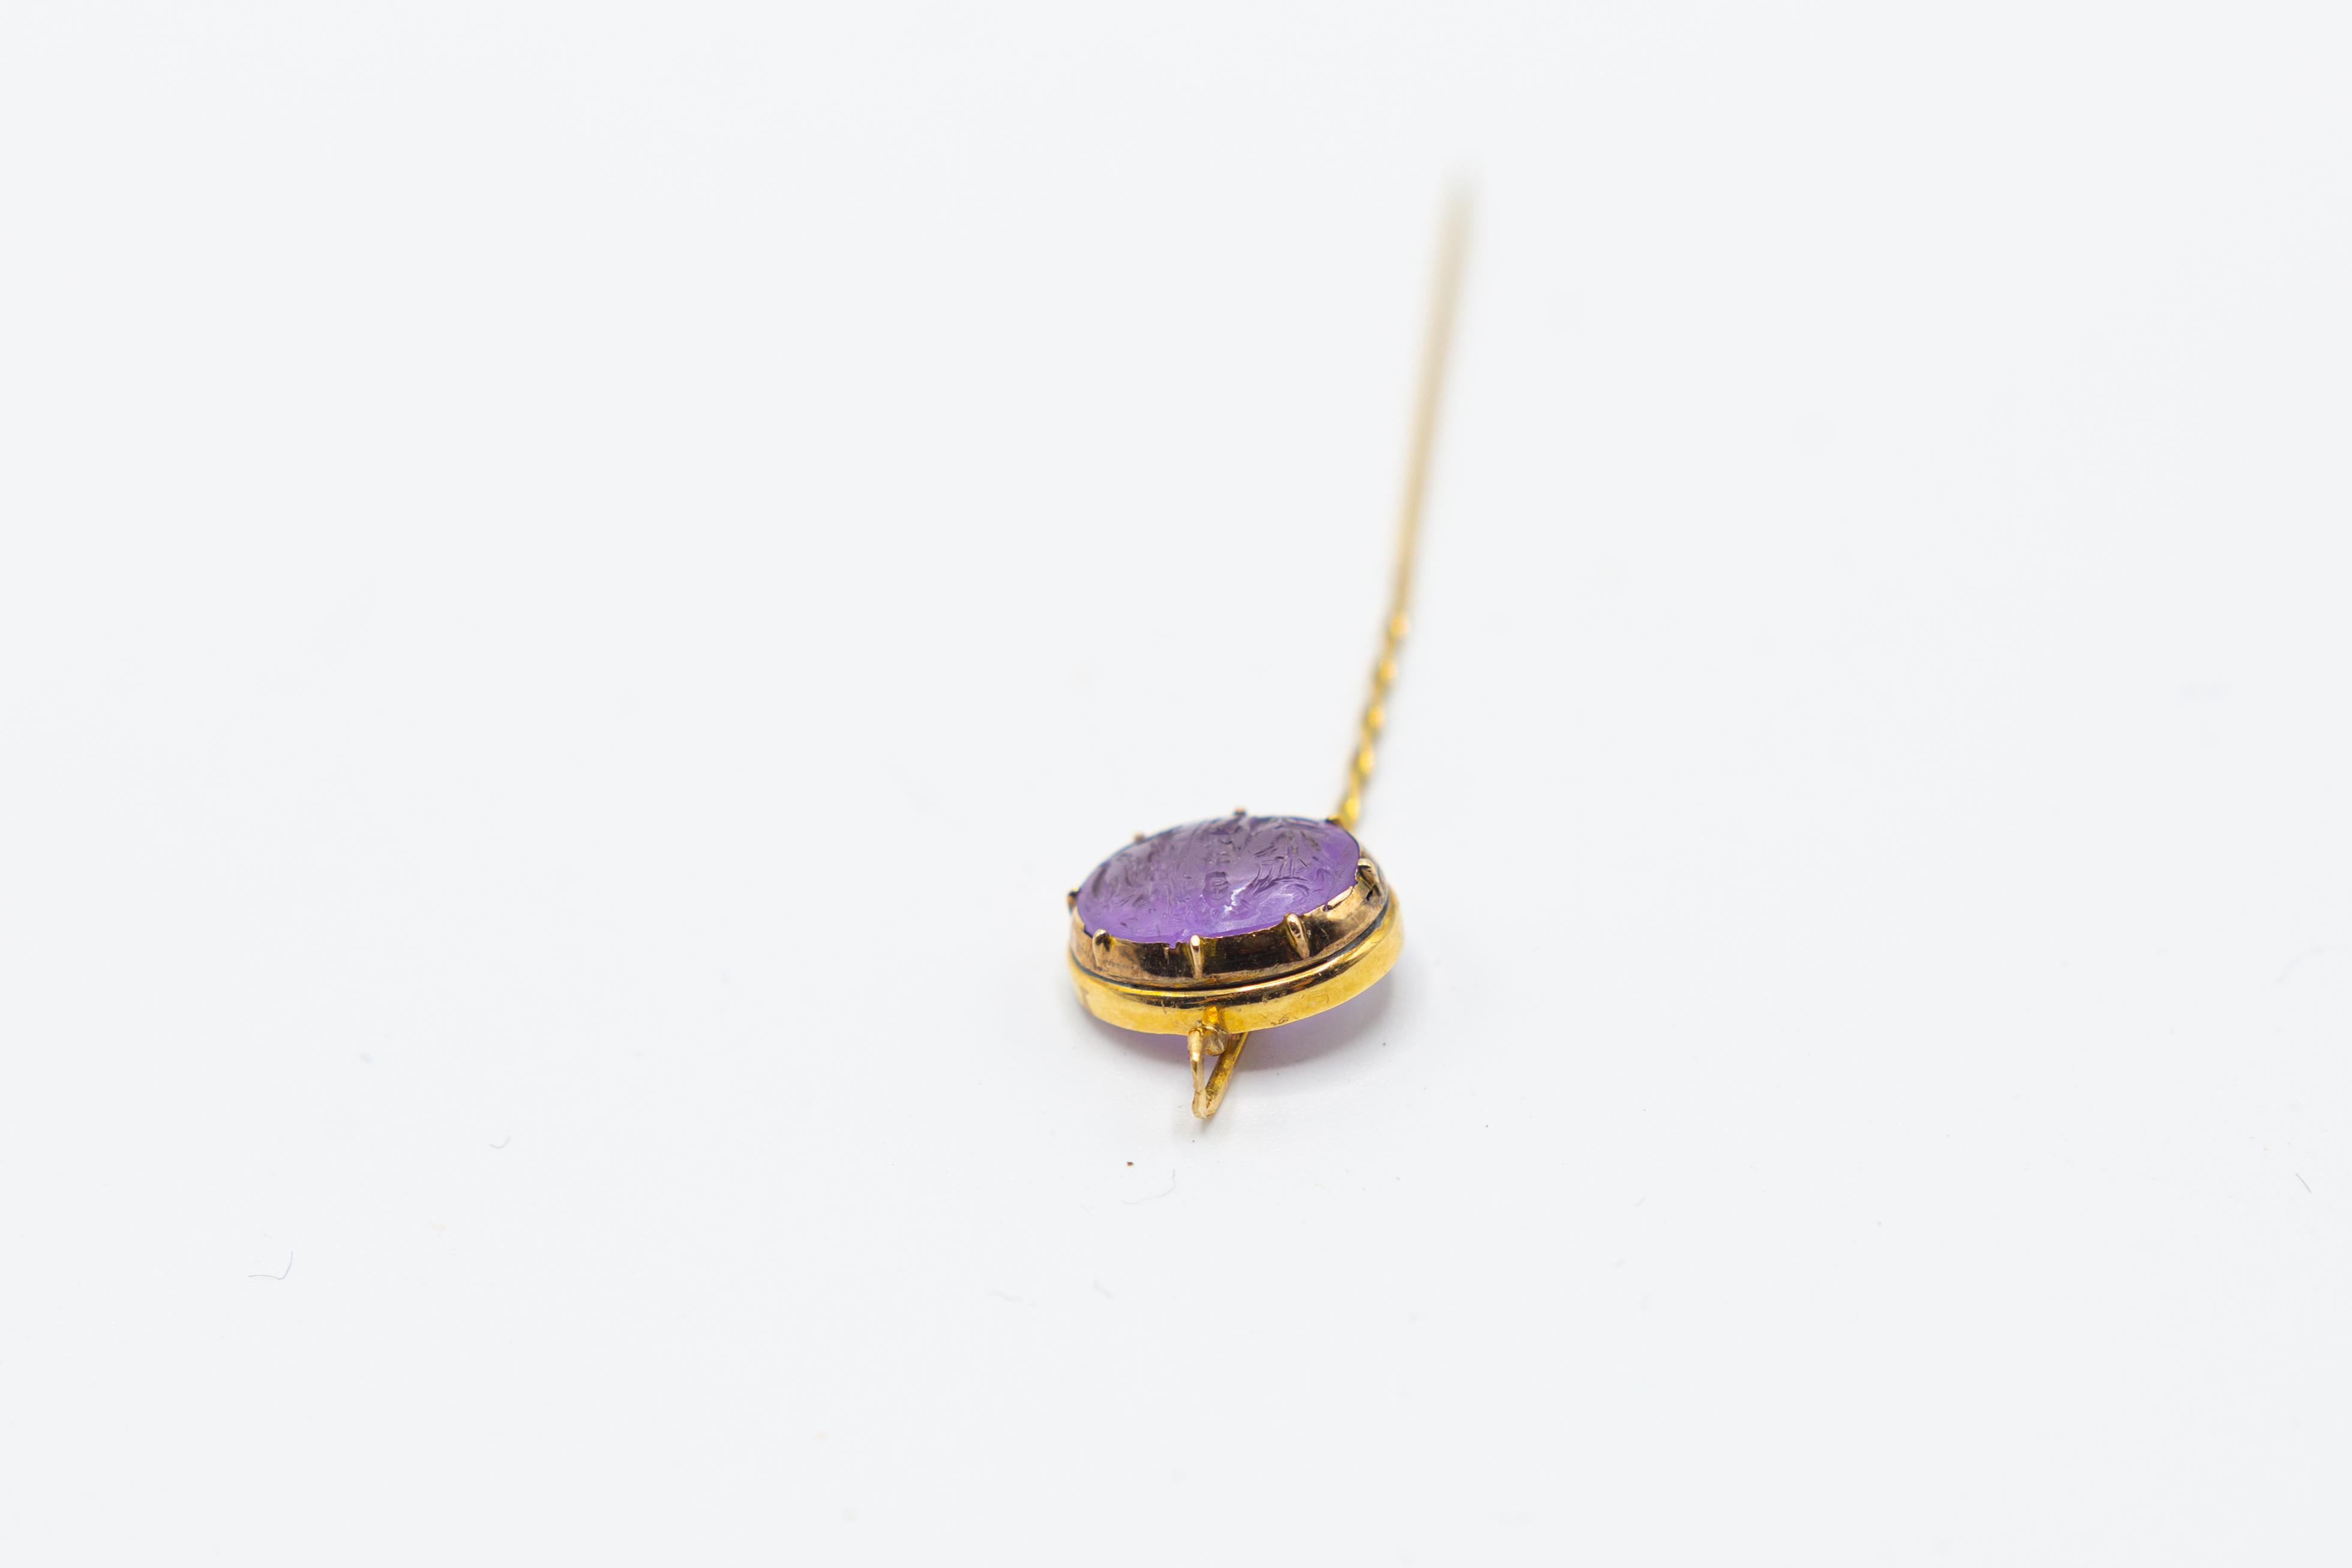 Antique Victorian amethyst stick pin in 18k gold. Hand carved amethyst where a woman puts a crown on a man. 1880s. It comes from Austria. Meets the 18k gold purity tested by professional jeweler.